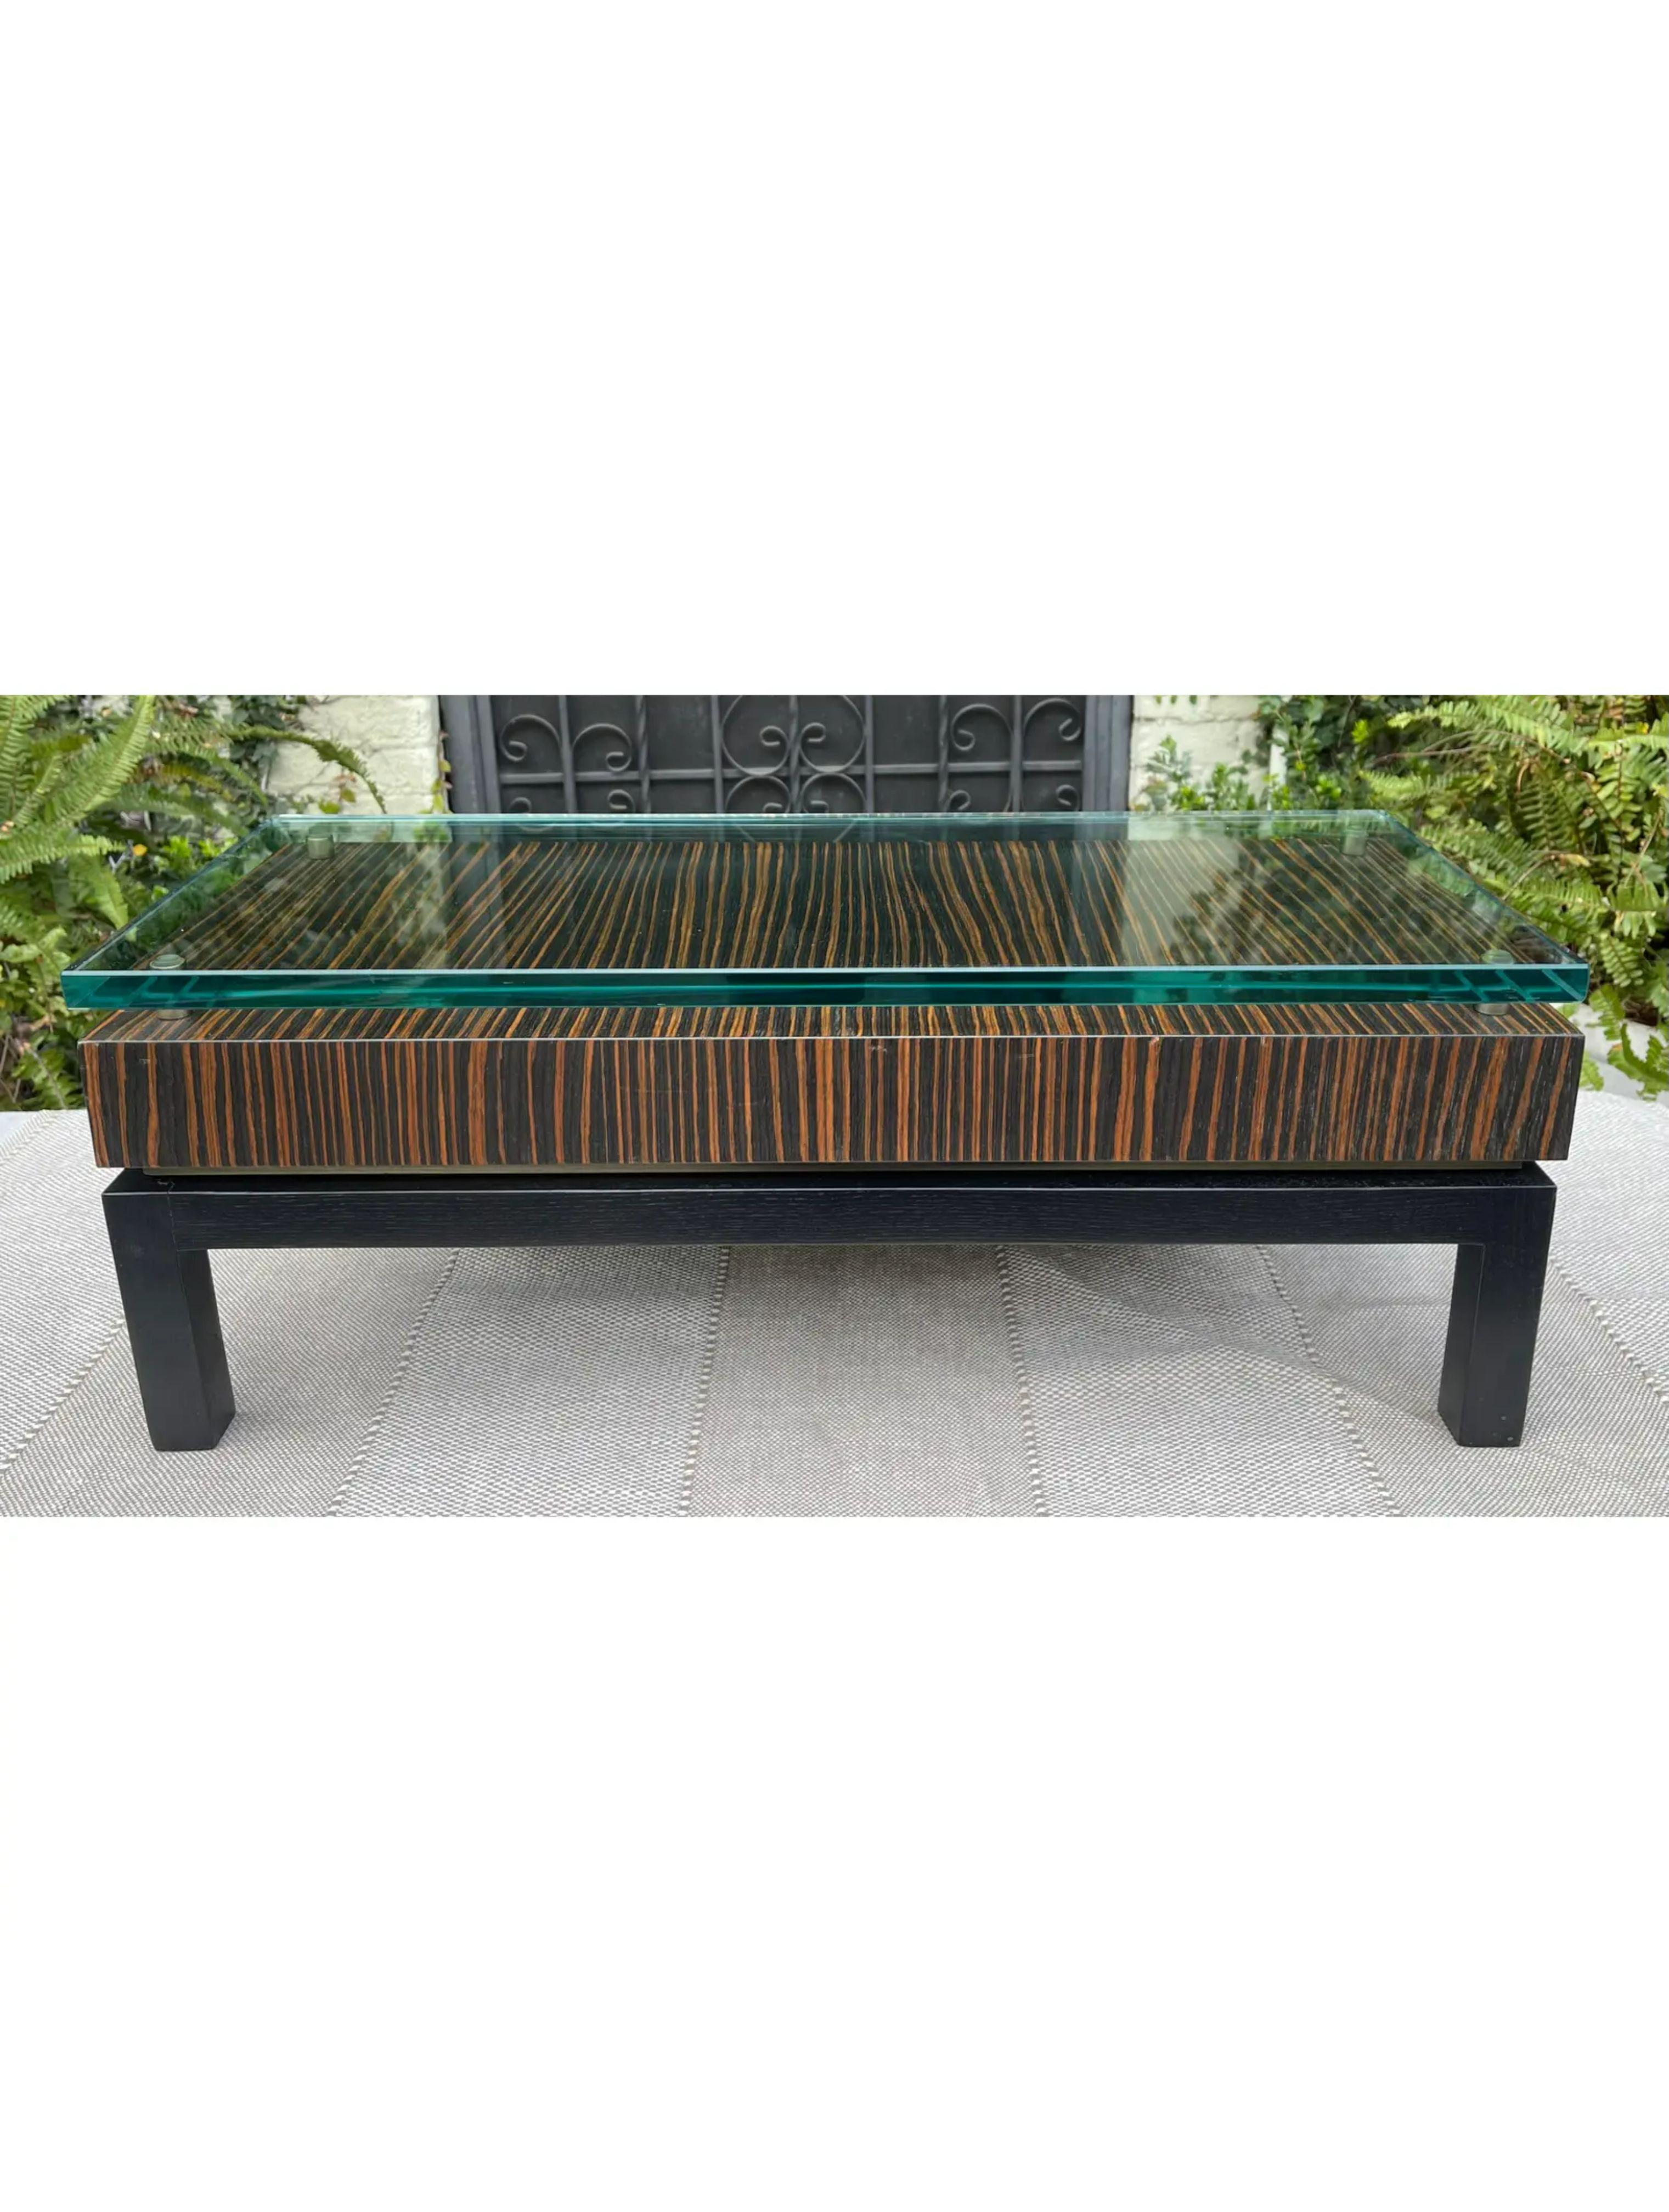 Modern Art Deco Style macassar & glass low table.
Priced each! This listing is for one table but there are two tables available.
Additional information:
Materials: Ebony, Glass
Color: Brown
Period: 1990s
Styles: Art Deco, Modern
Table Shape: